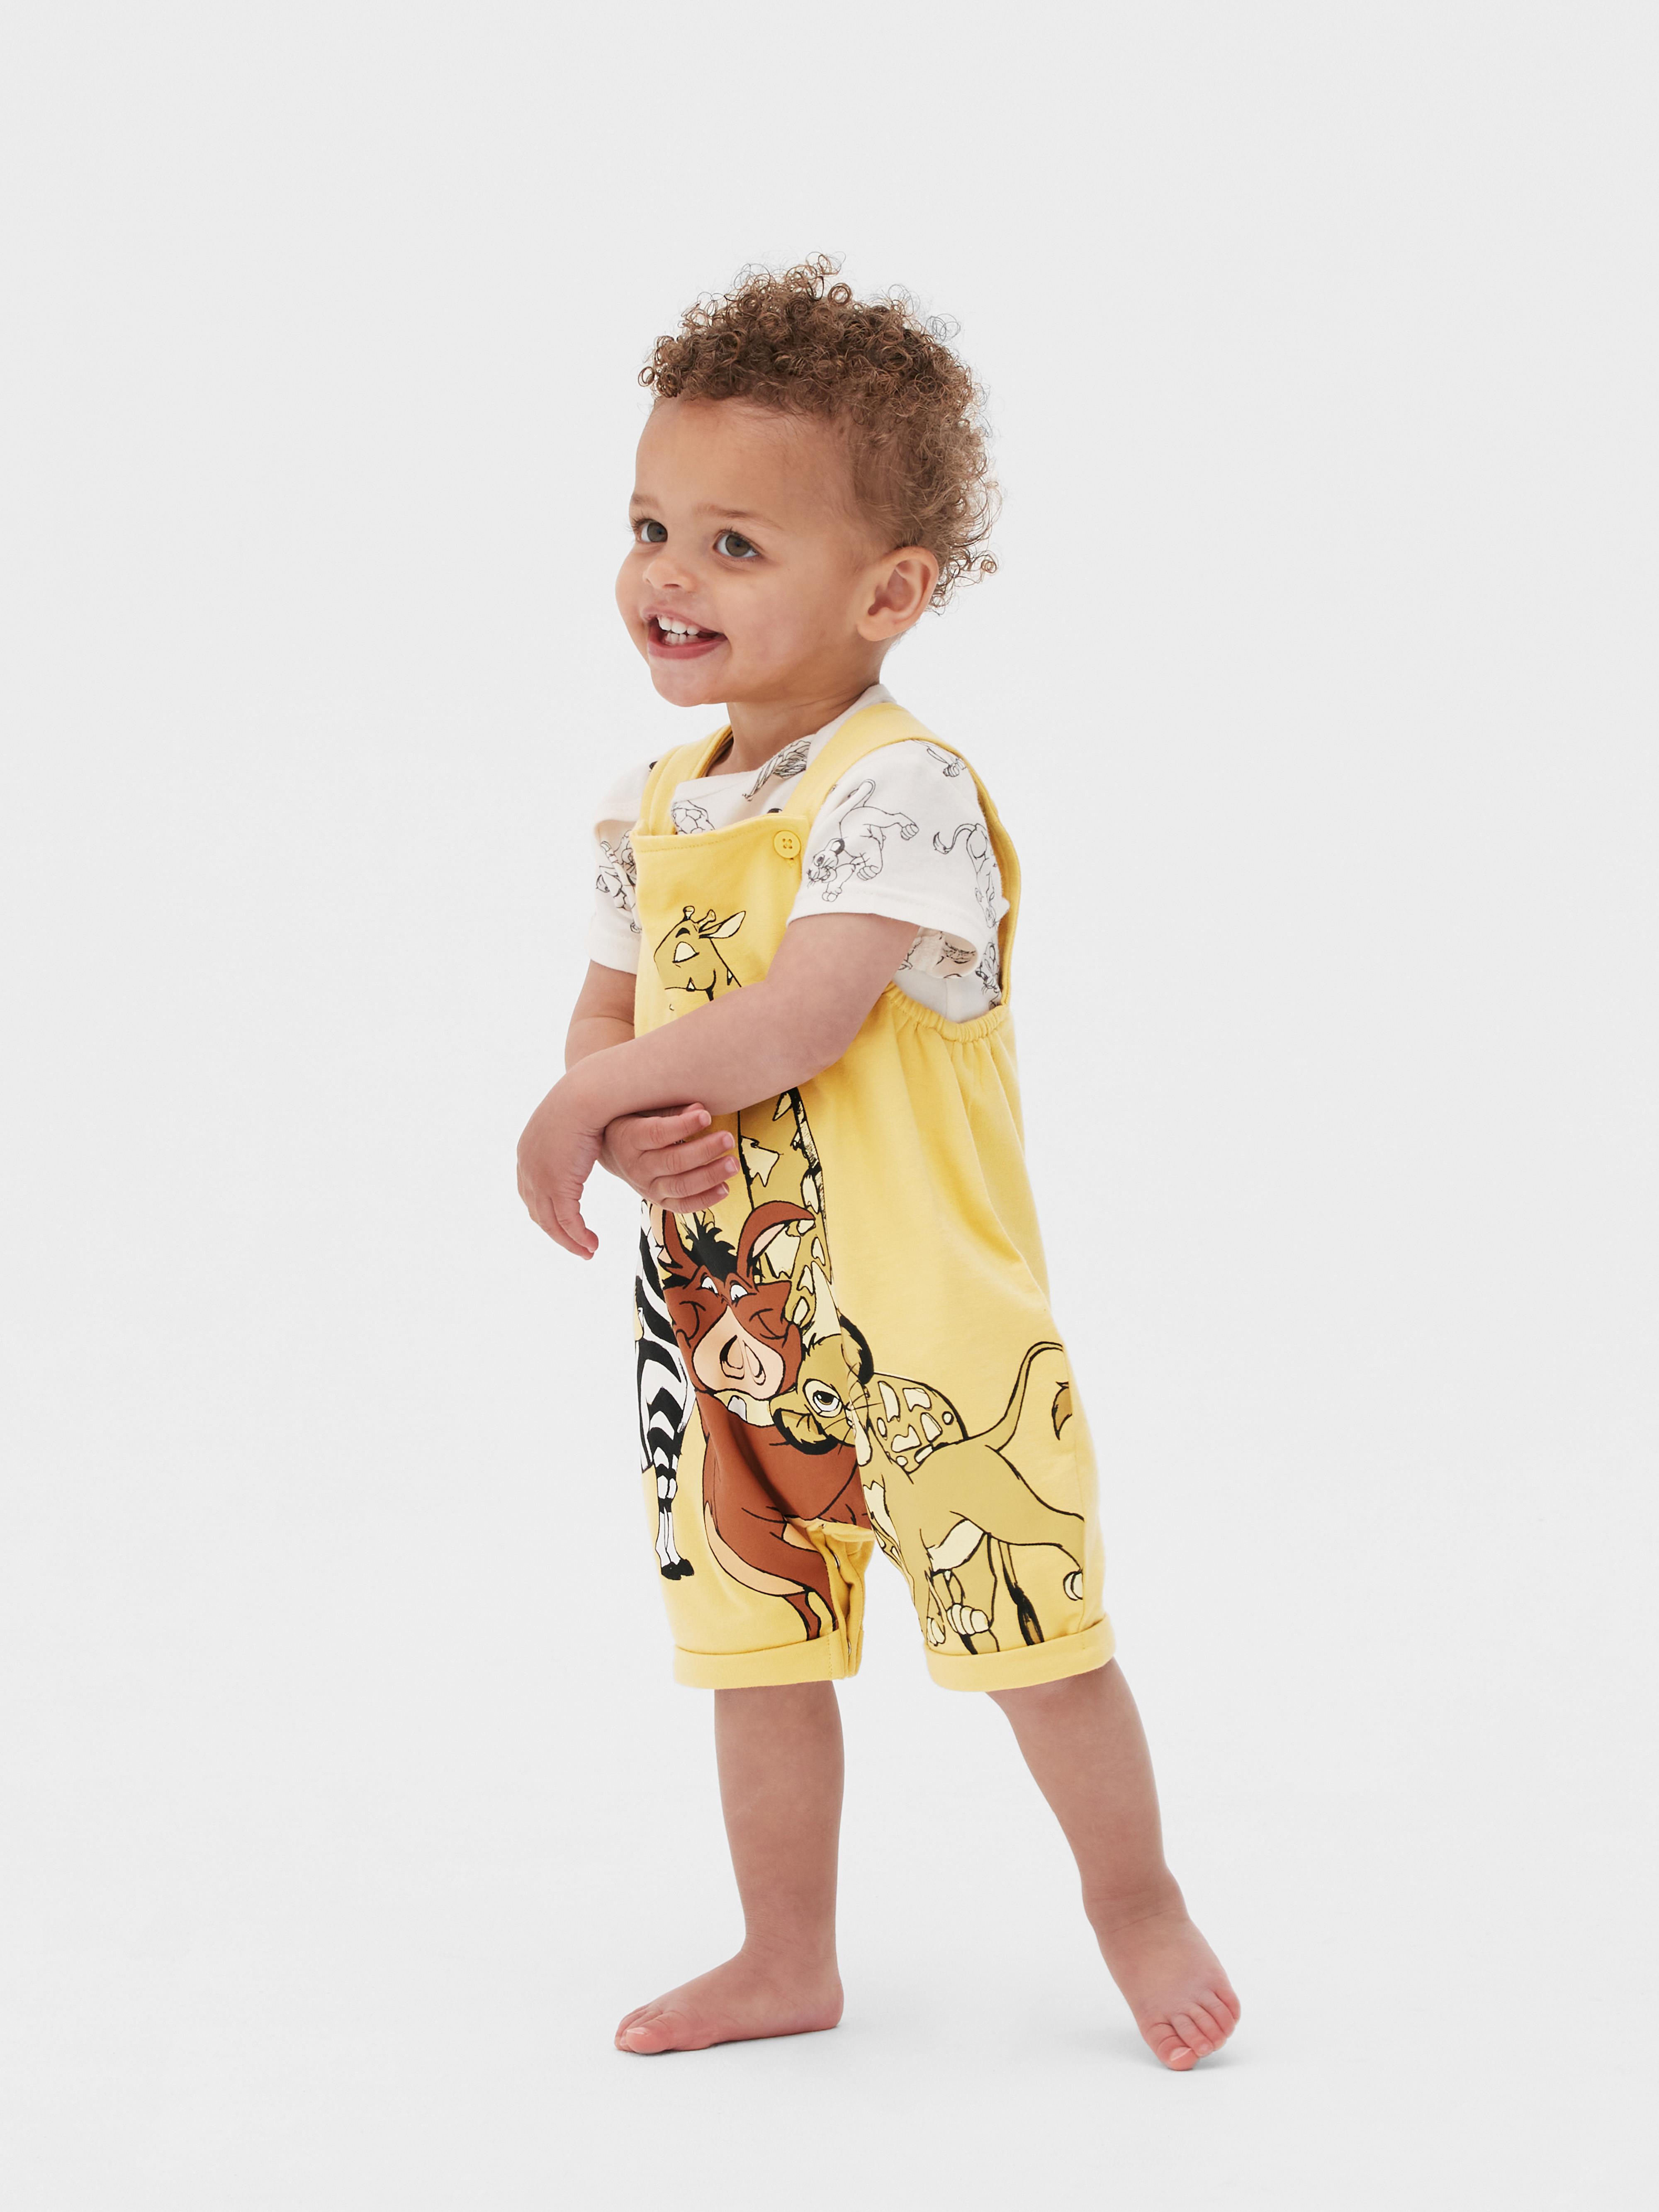 Disney’s The Lion King T-shirt and Dungarees Set